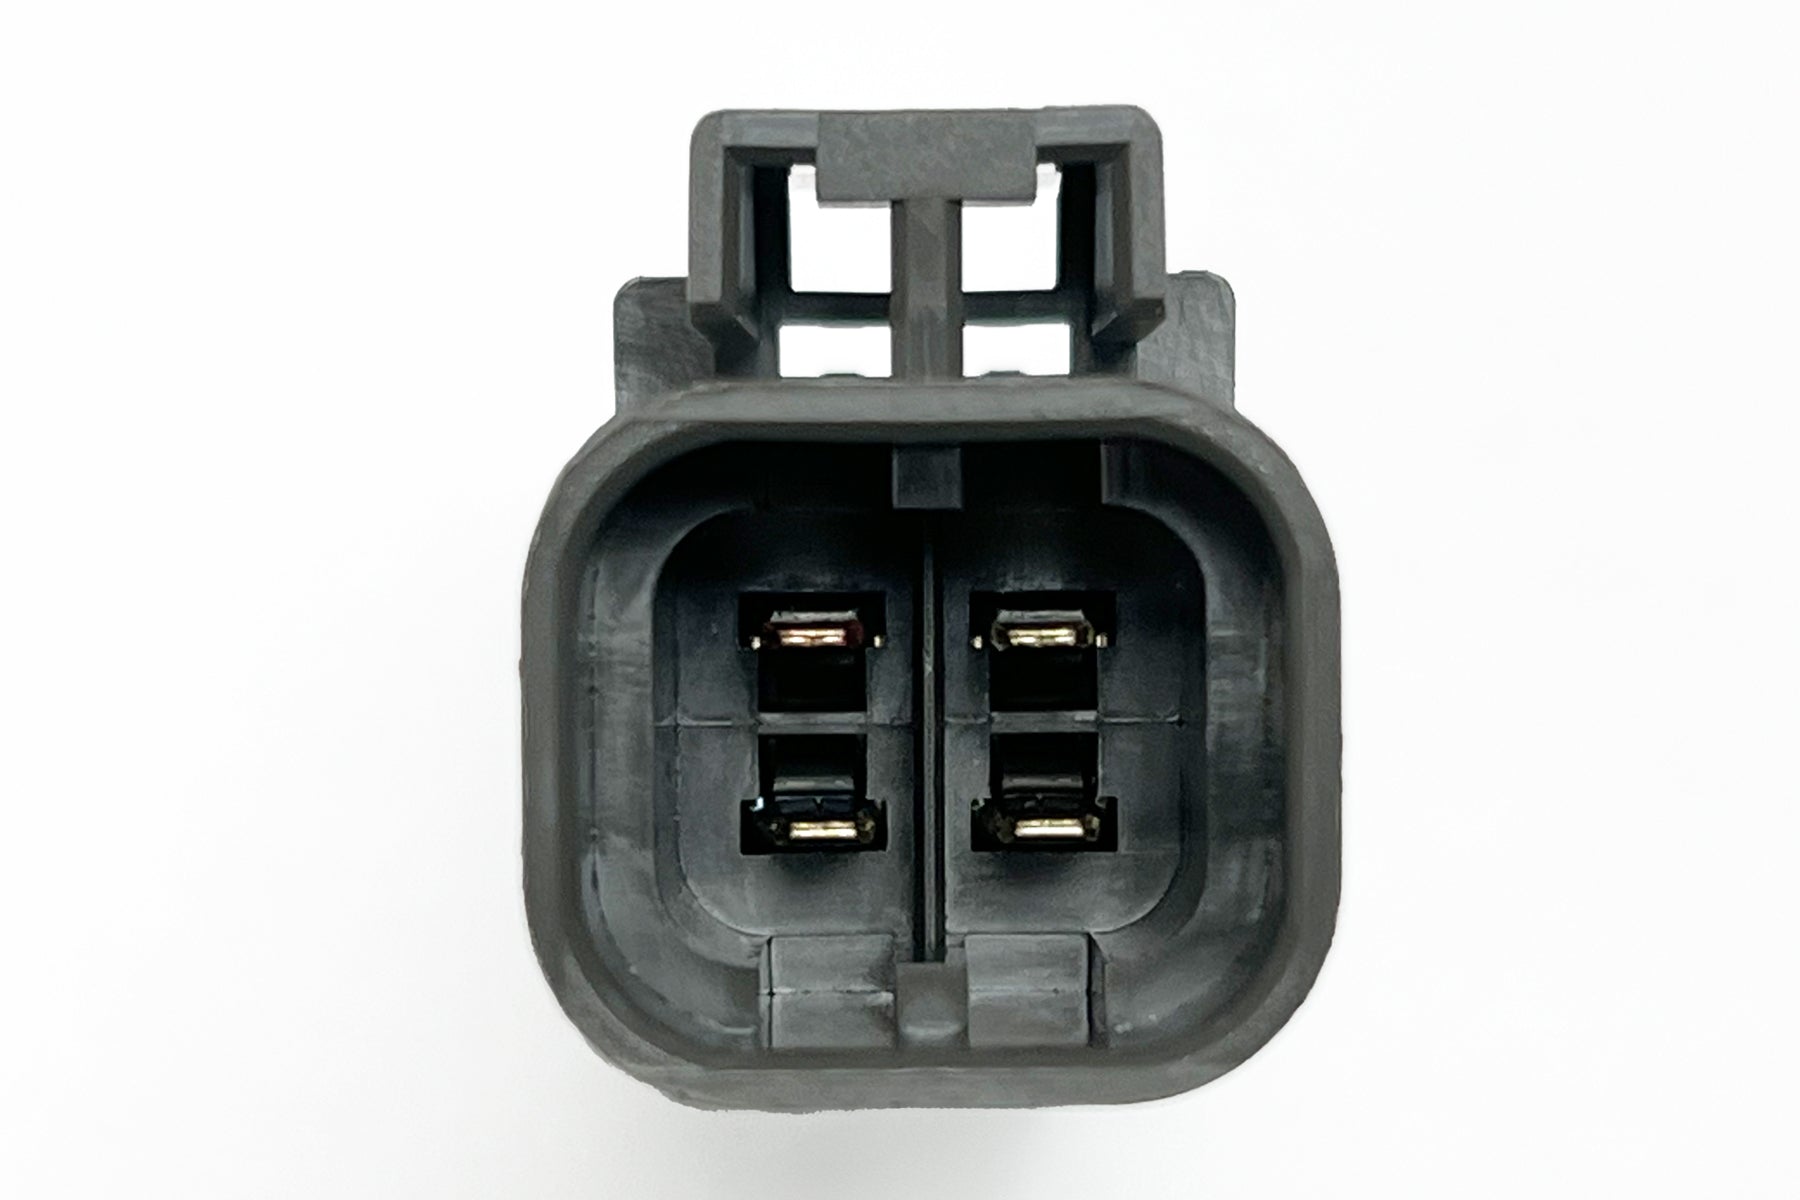 Optional FD3S V-layout Electrical Fan Extension Harness(es)